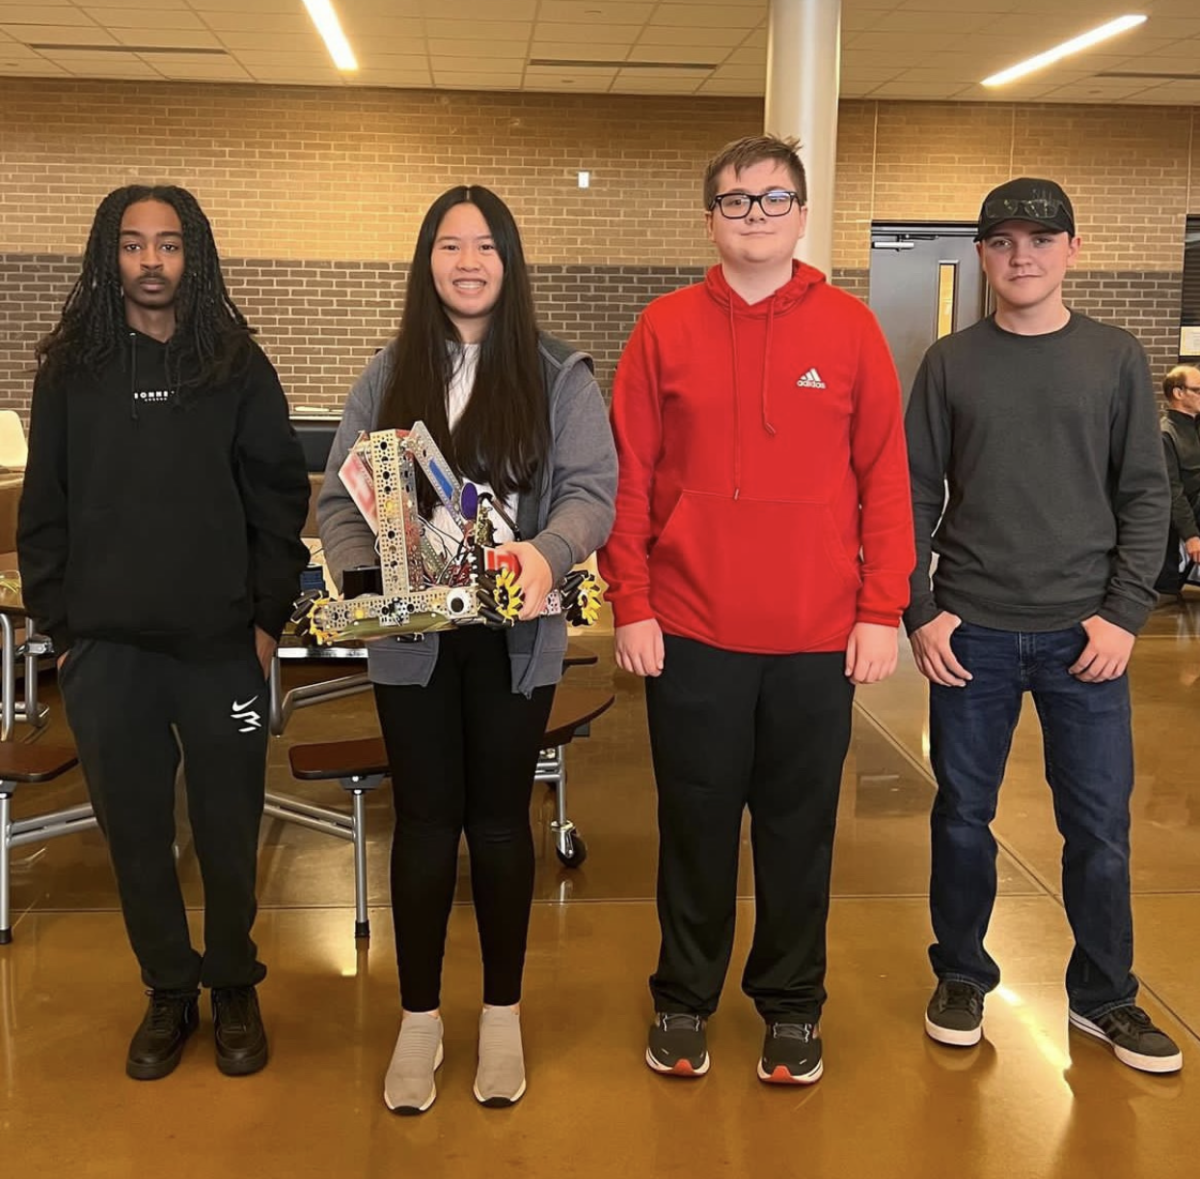 Students+in+Team+%2310123+with+their+robot+after+placing+fourth+in+their+competition.